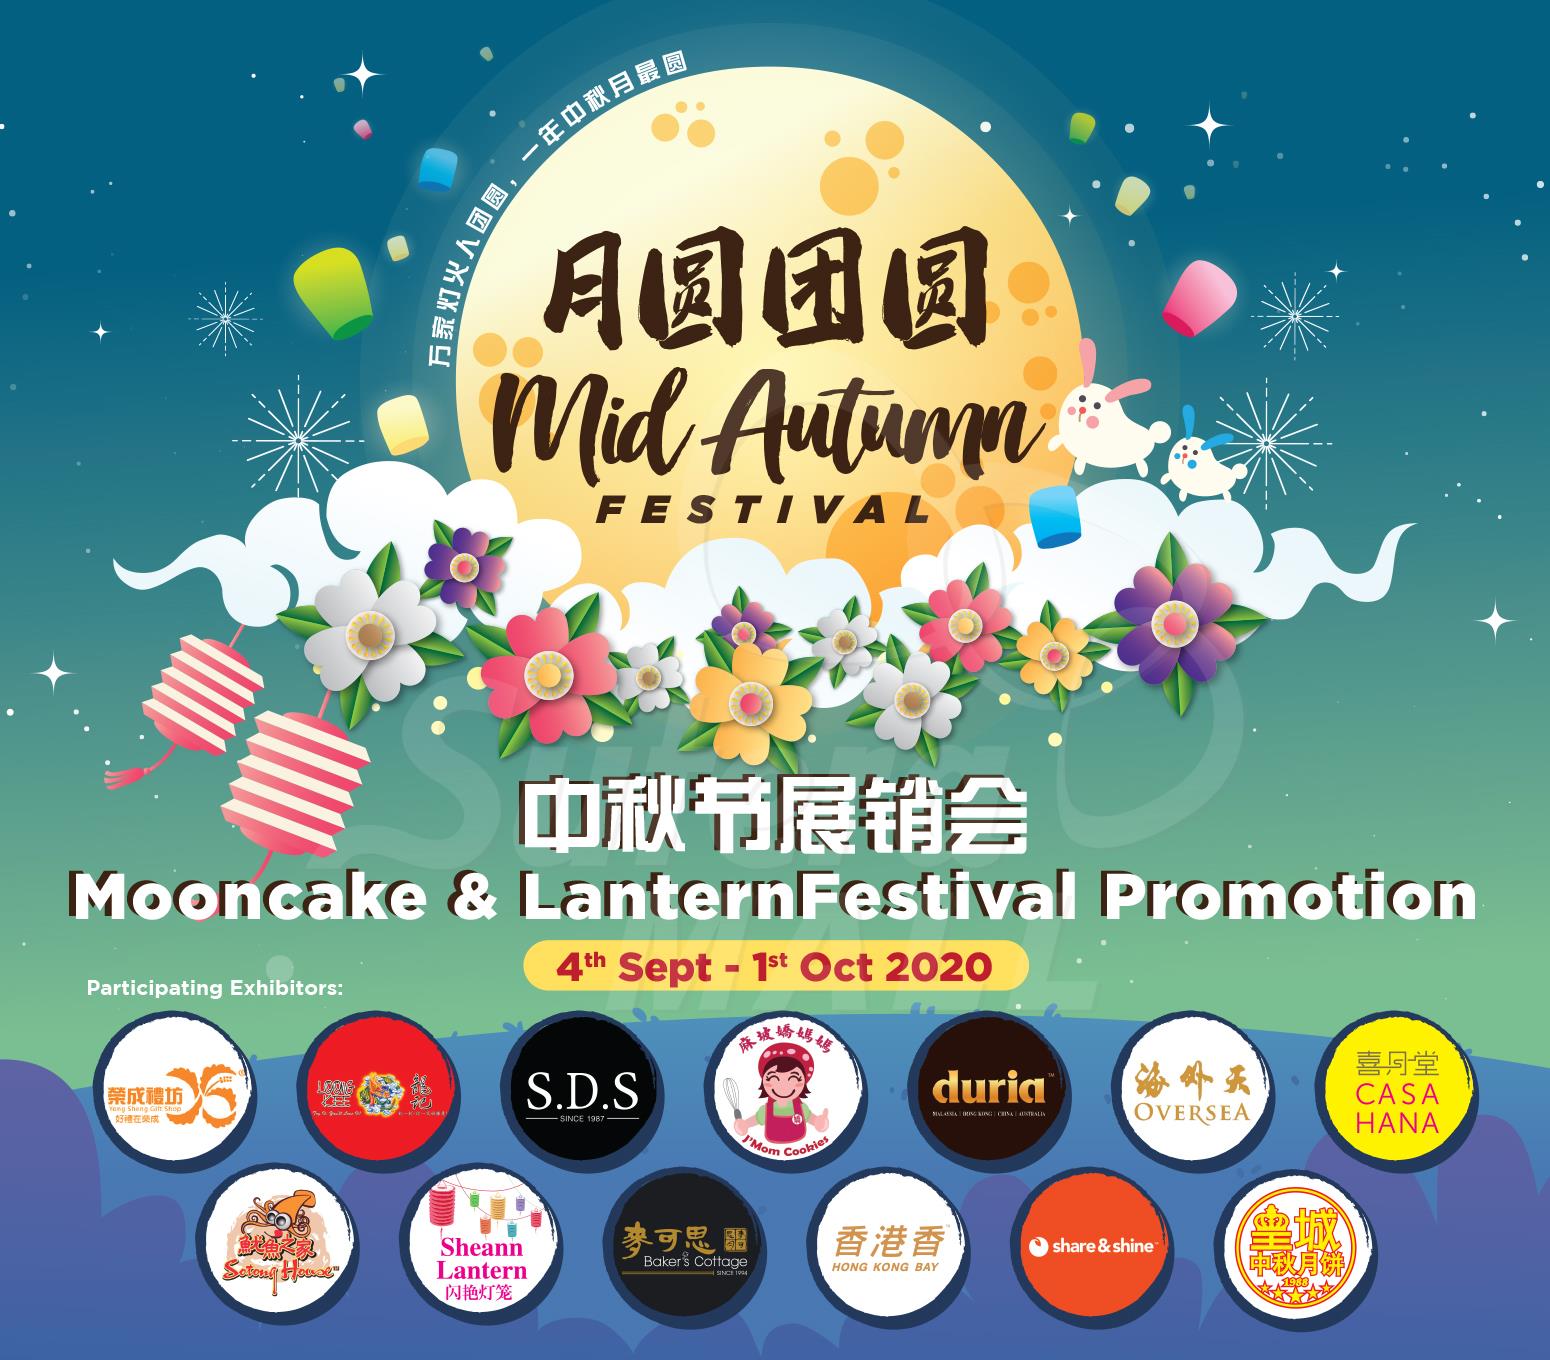 <div class='event-date'>04 Sep 2020 to 01 Oct 2020</div><div class='event-title'><h4>Mooncake Promotion 2020</h4></div>